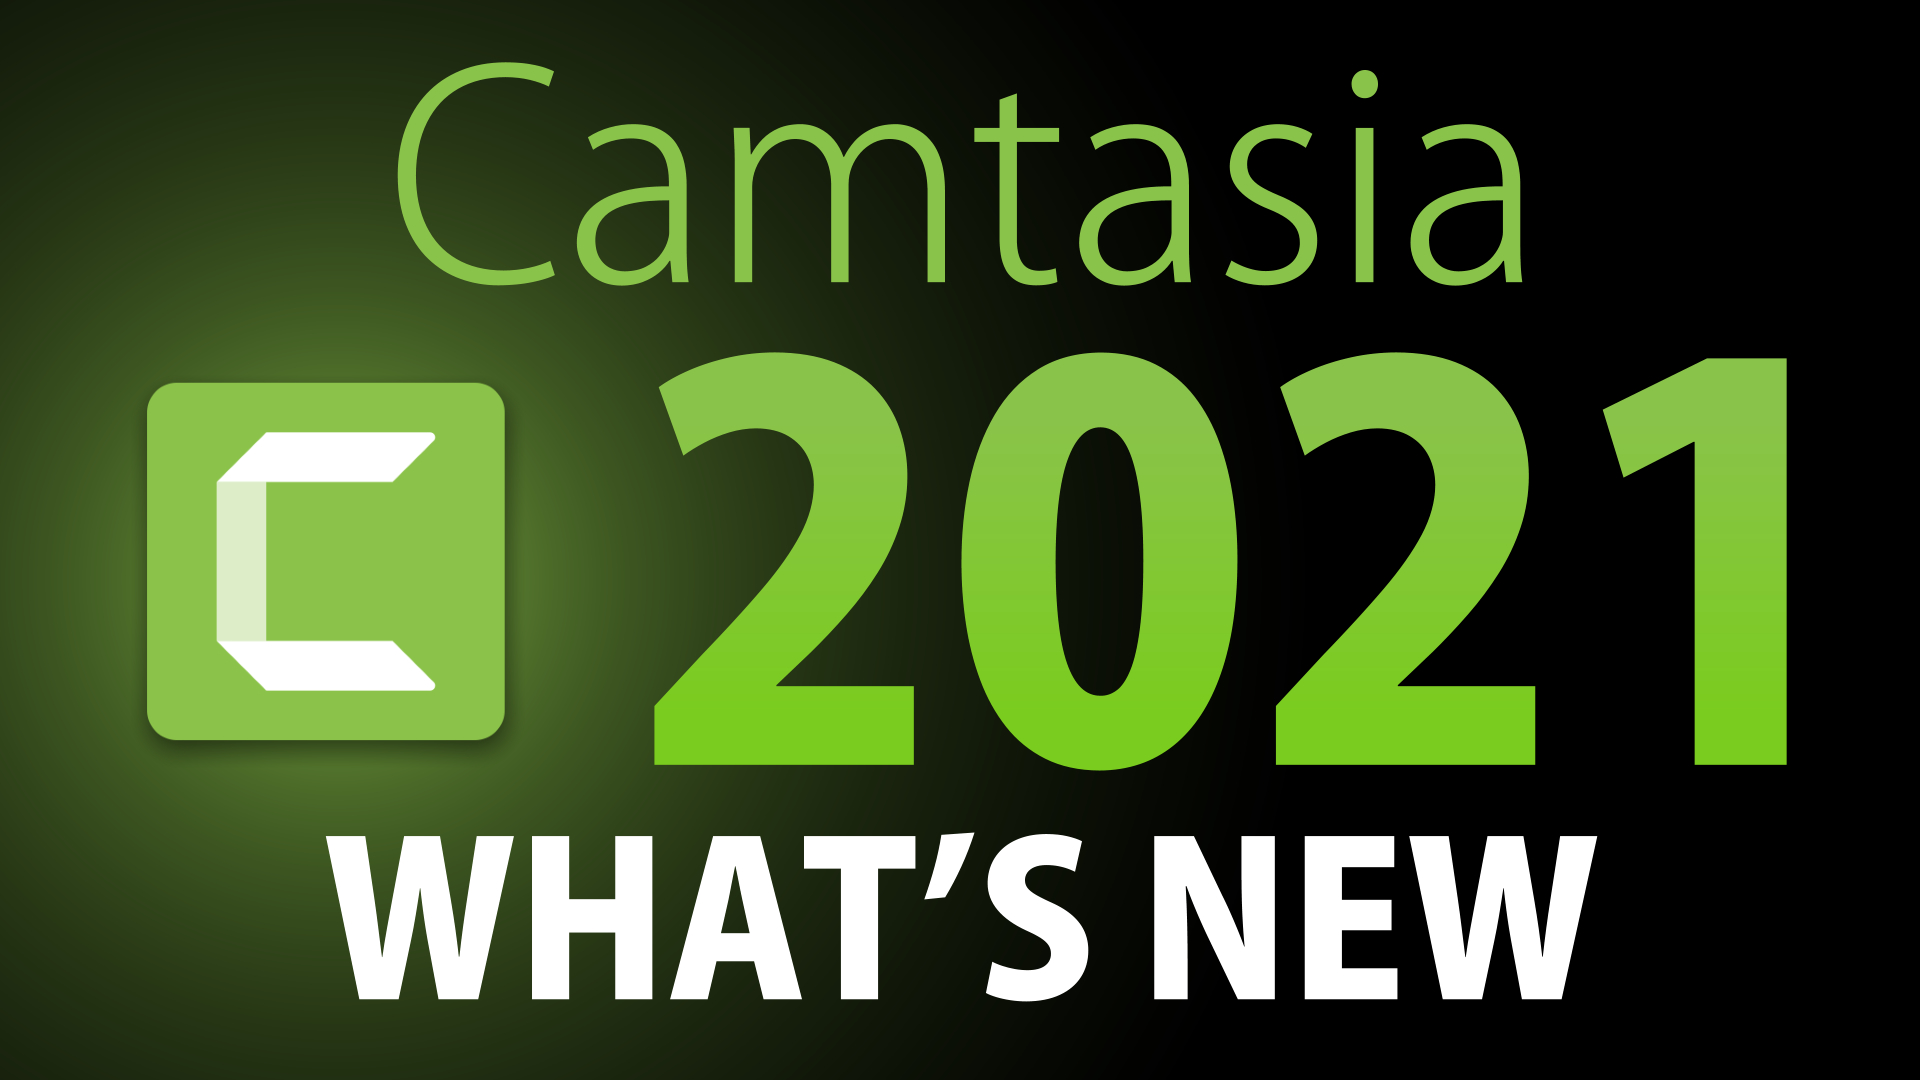 What's new in Camtasia 2021: All the new features, functions and improvements